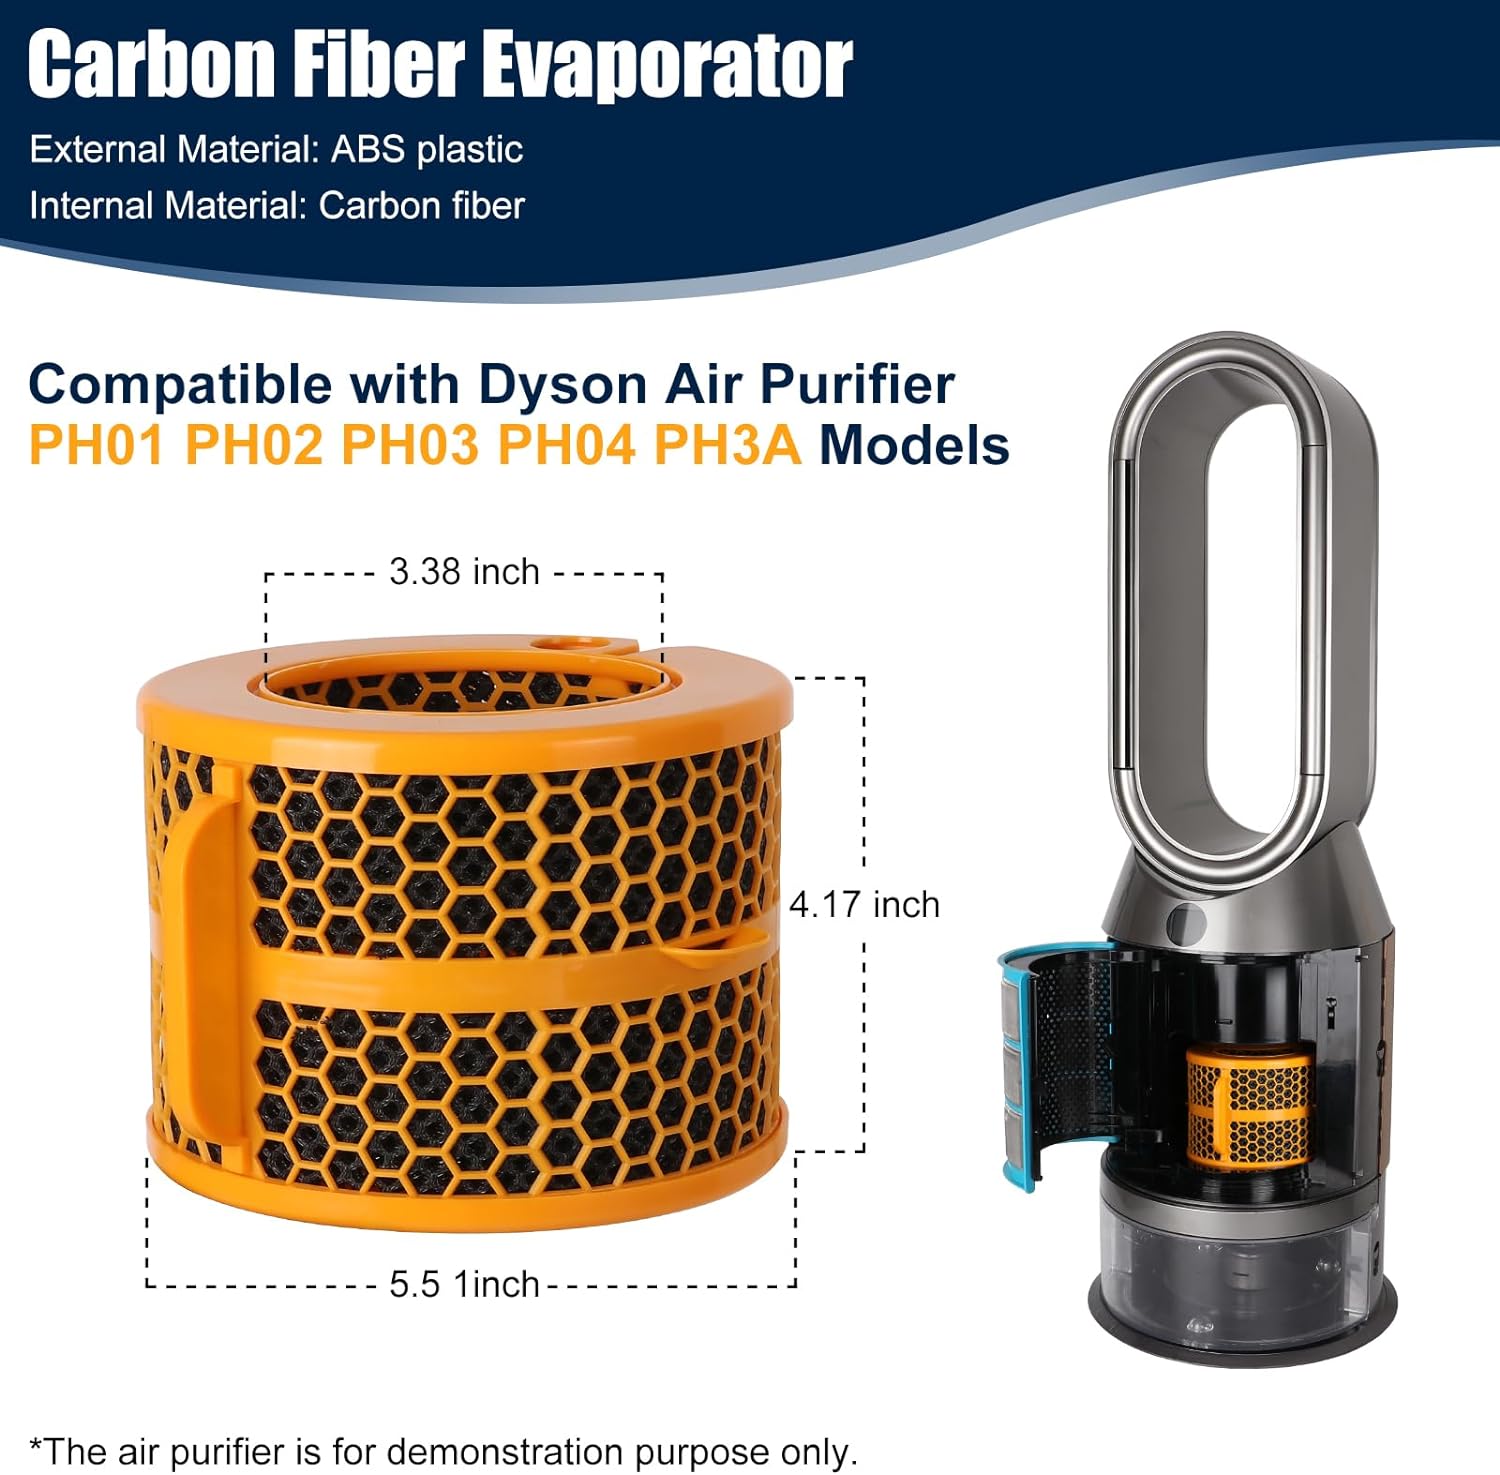 WYWY.Wide Air Purifier Carbon Fiber Evaporator Replacement for Dyson PH01 PH02 PH03 PH04 PH3A Air Purifier 970718 - 01 Filter Replacement Parts - Amazing Gadgets Outlet